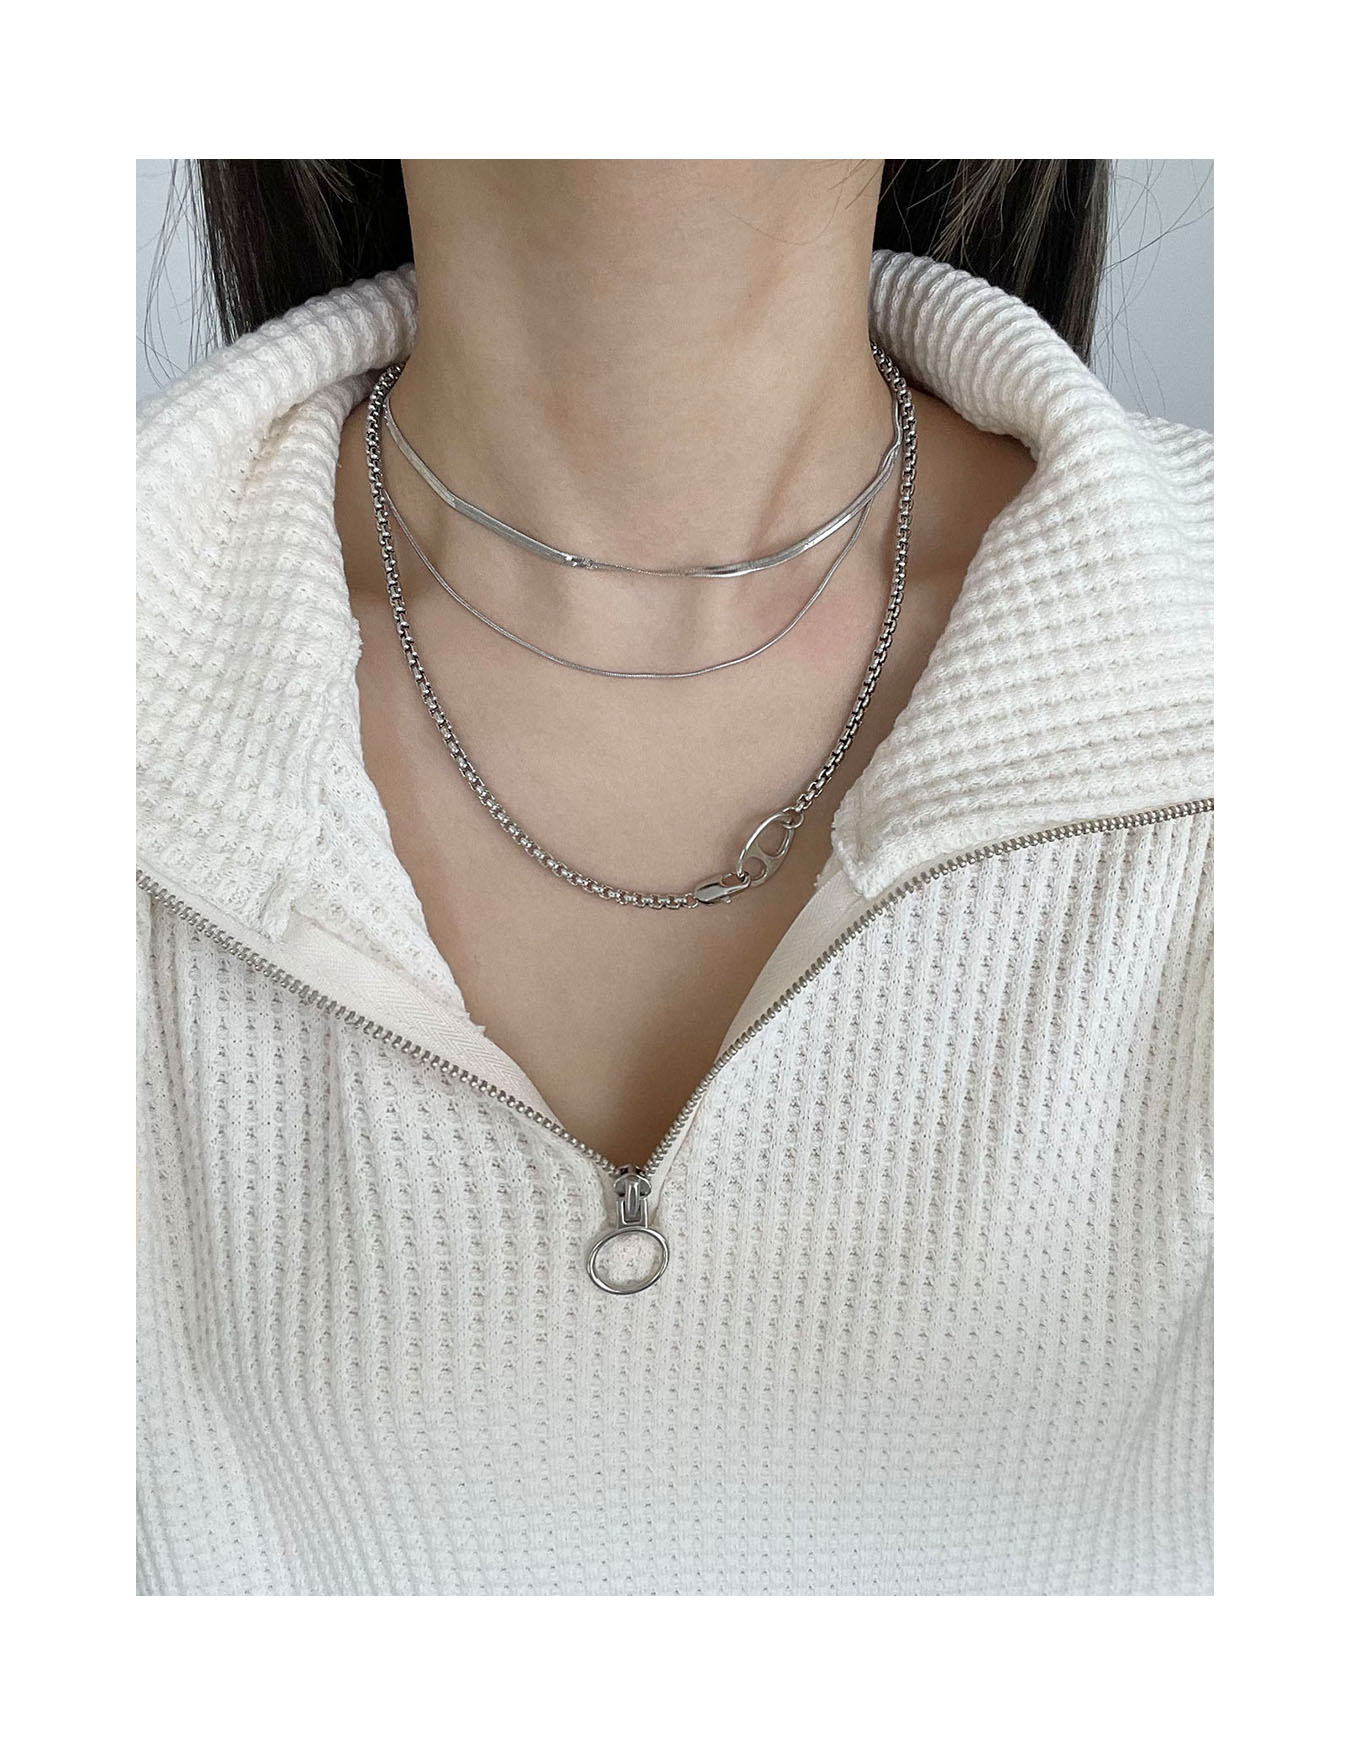 pig chain necklace